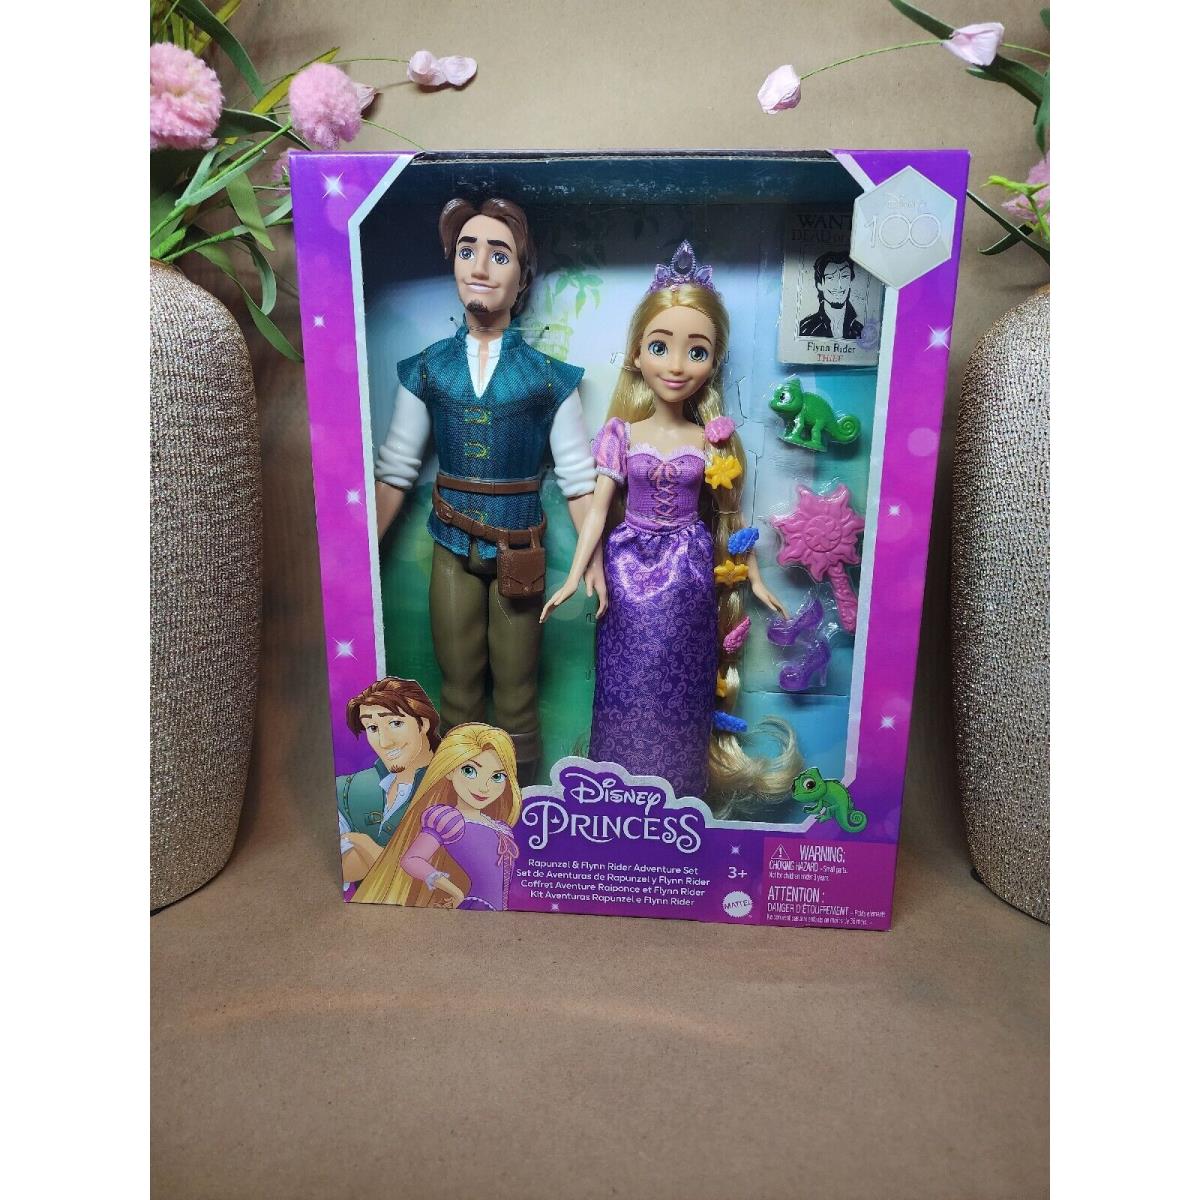 Disney Princess Toys Rapunzel and Flynn Rider Dolls and Accessories